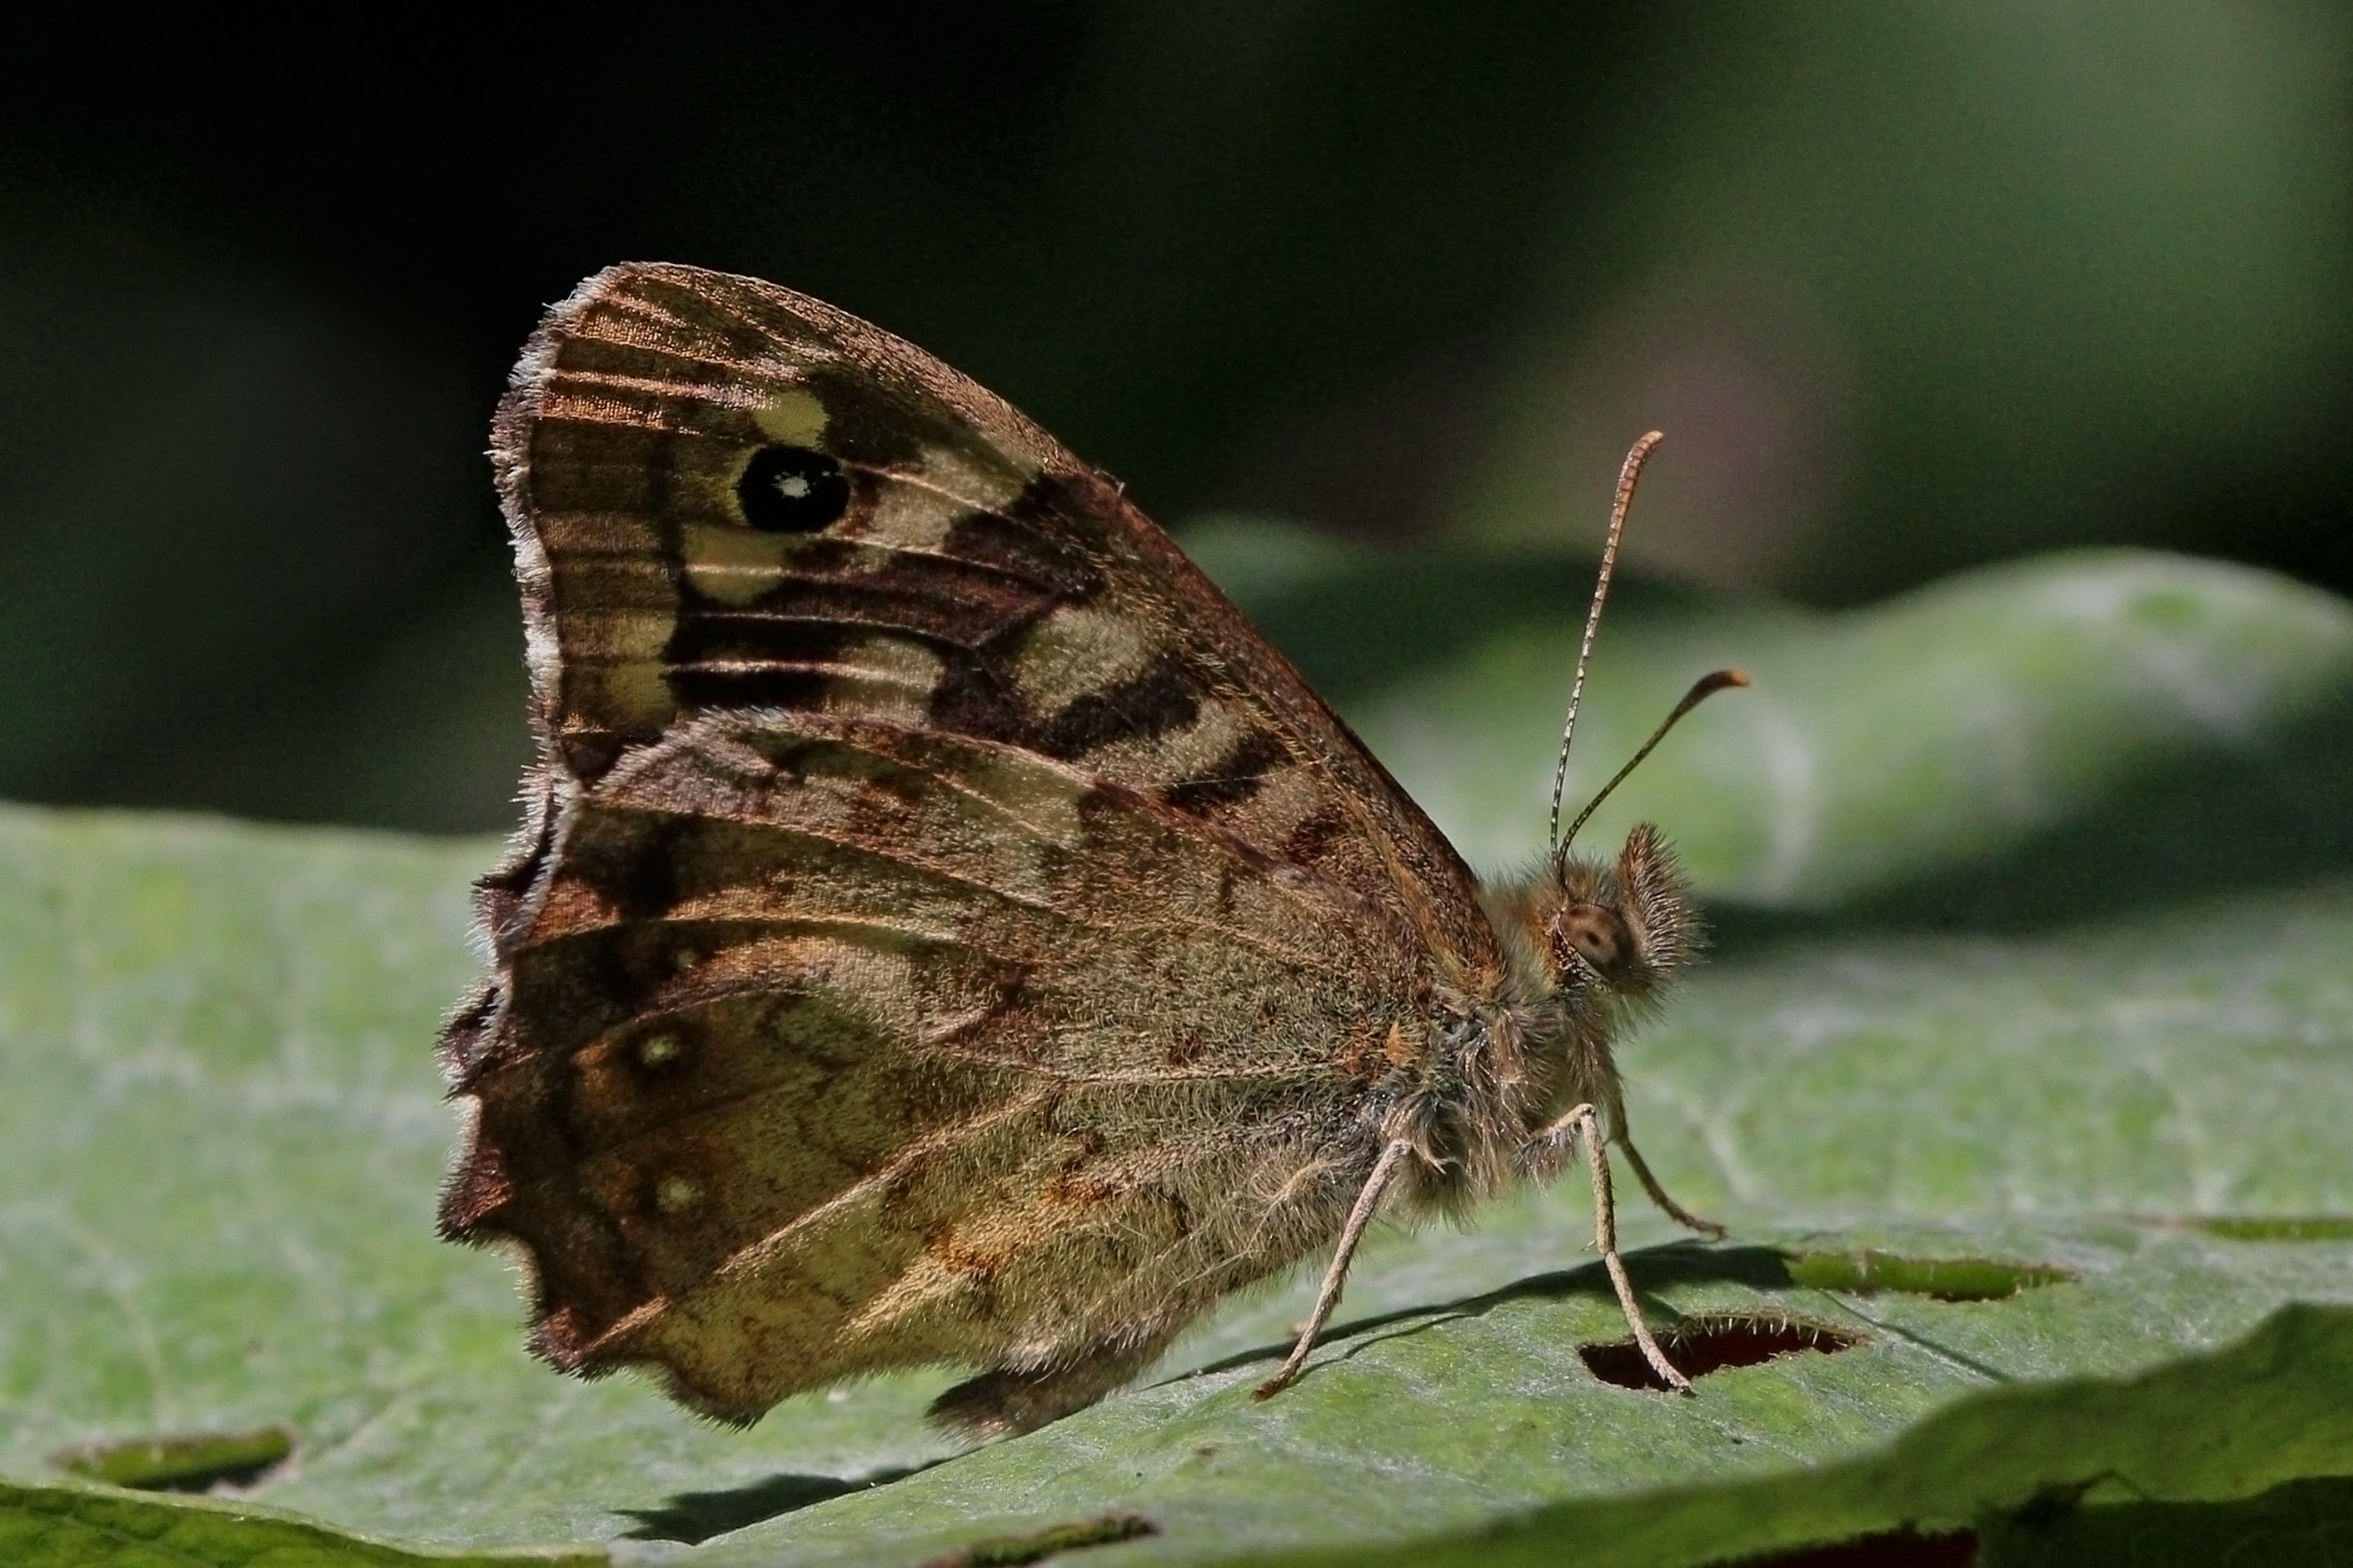 Speckled wood butterfly (Pararge aegeria) male underside 2